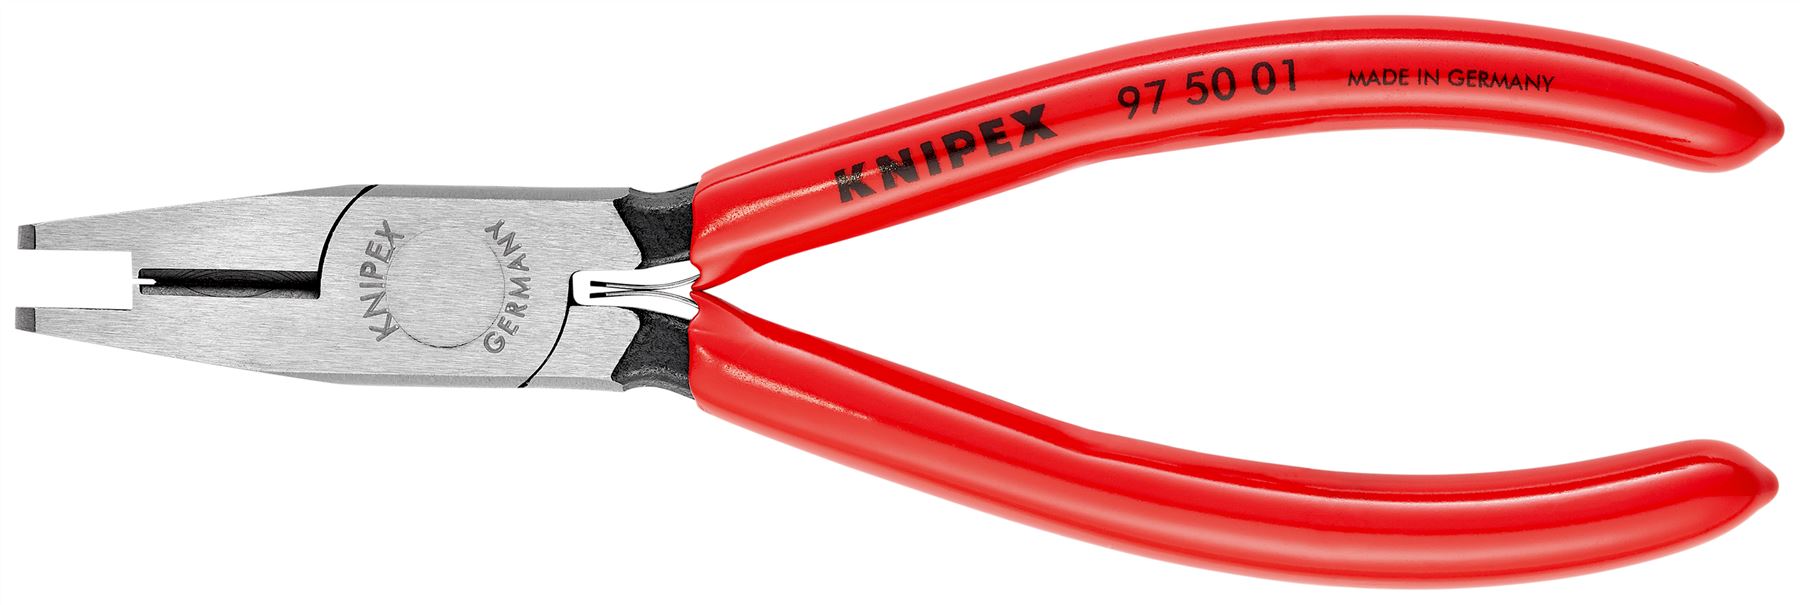 KNIPEX Crimping Pliers for Scotchlok Connectors with Side Cutter 155mm Plastic Coated Handles 97 50 01